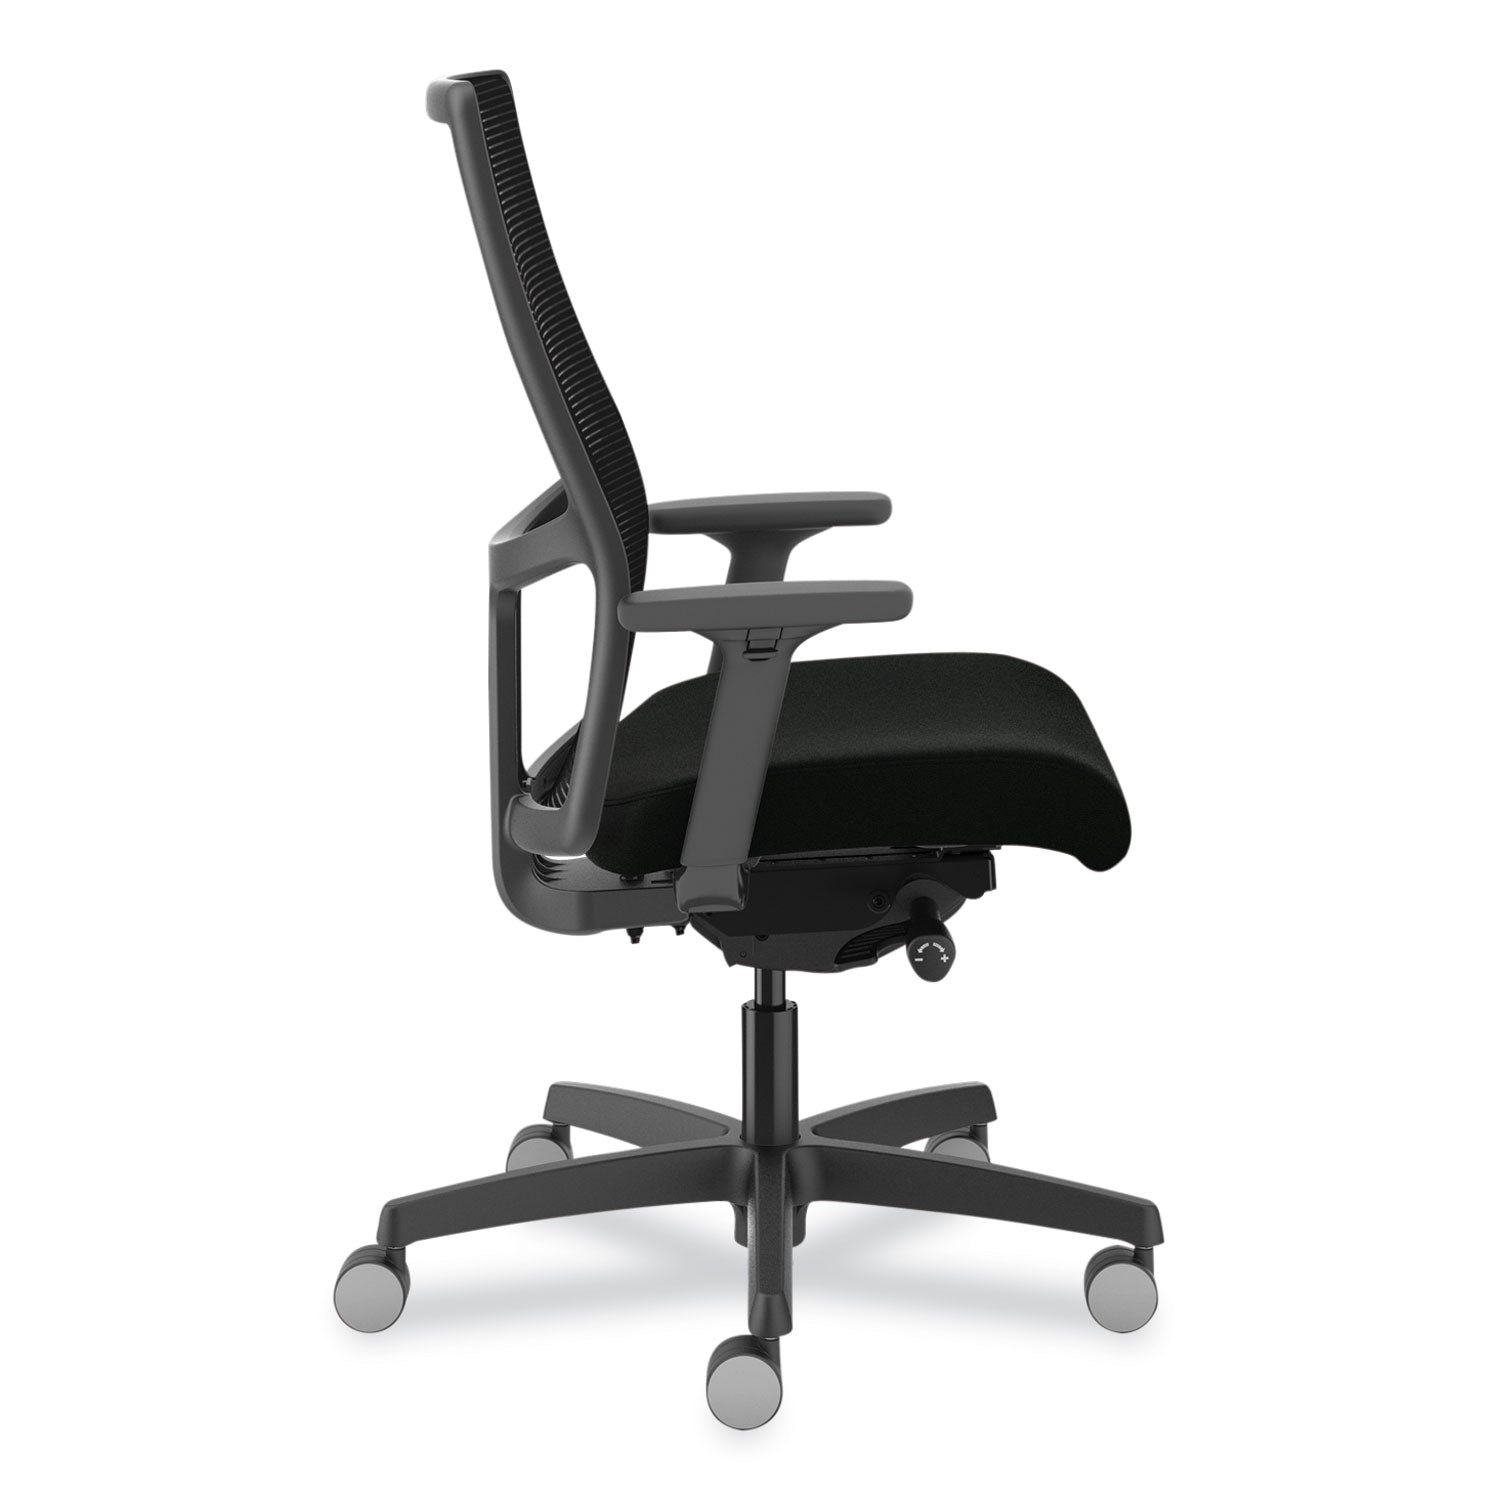 ignition-20-upholstered-mid-back-task-chair-17-to-215-seat-height-black-fabric-seat-back-ships-in-7-10-business-days_honi2u2ahur10tk - 3